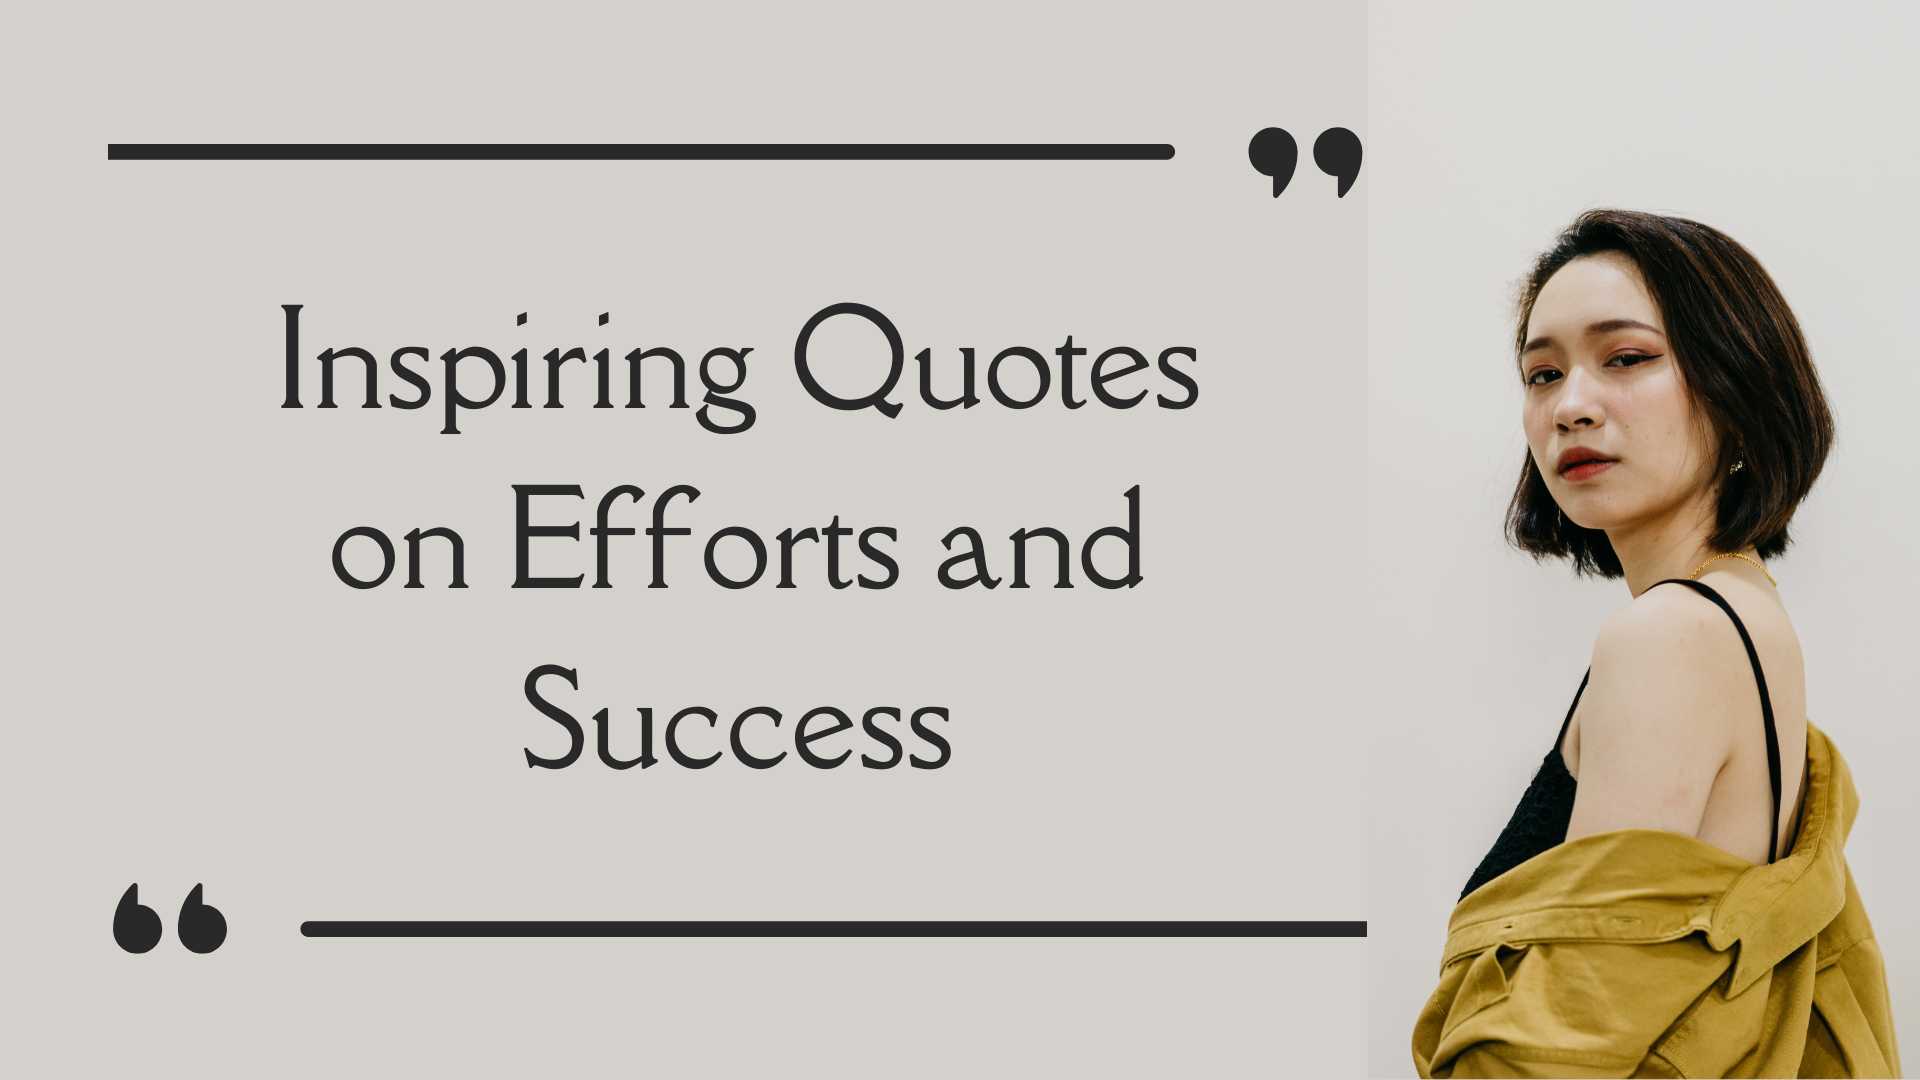 Inspiring quotes on efforts and success